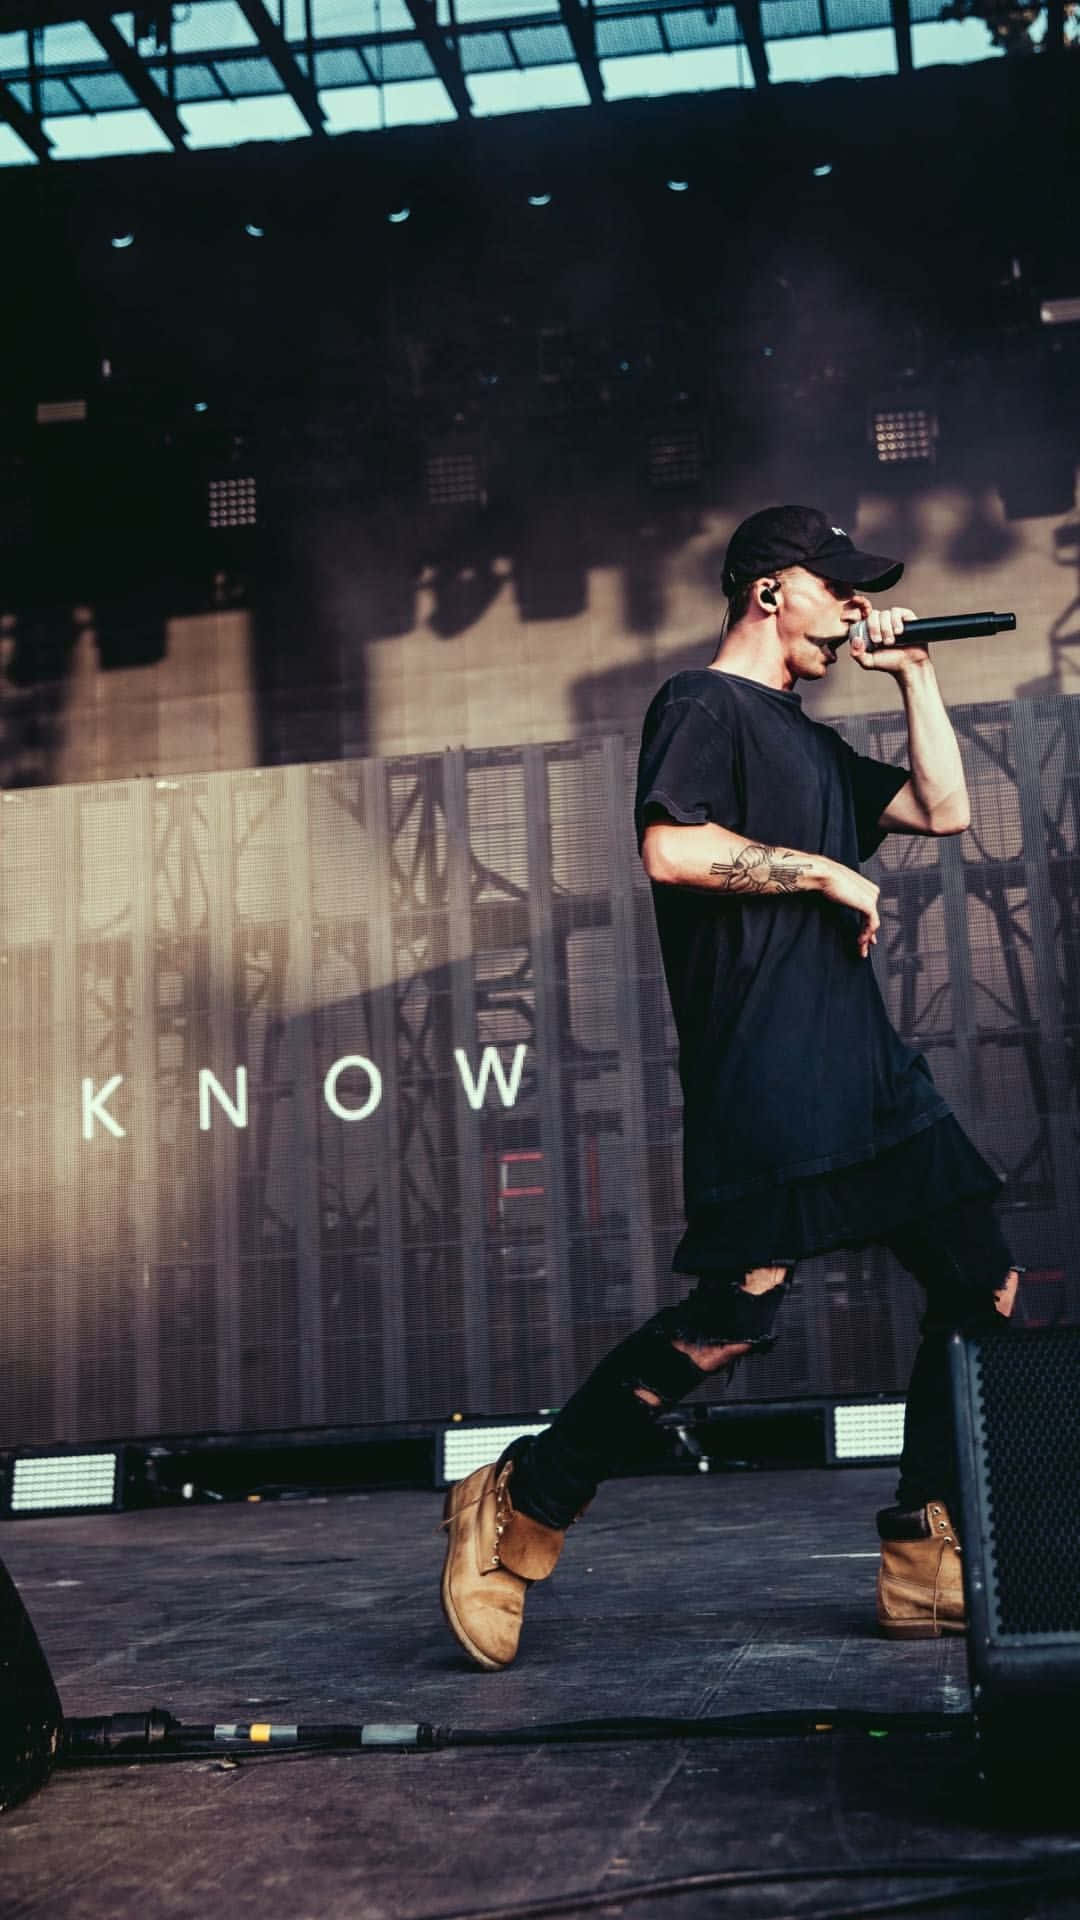 A Man On Stage With The Words Know Wallpaper